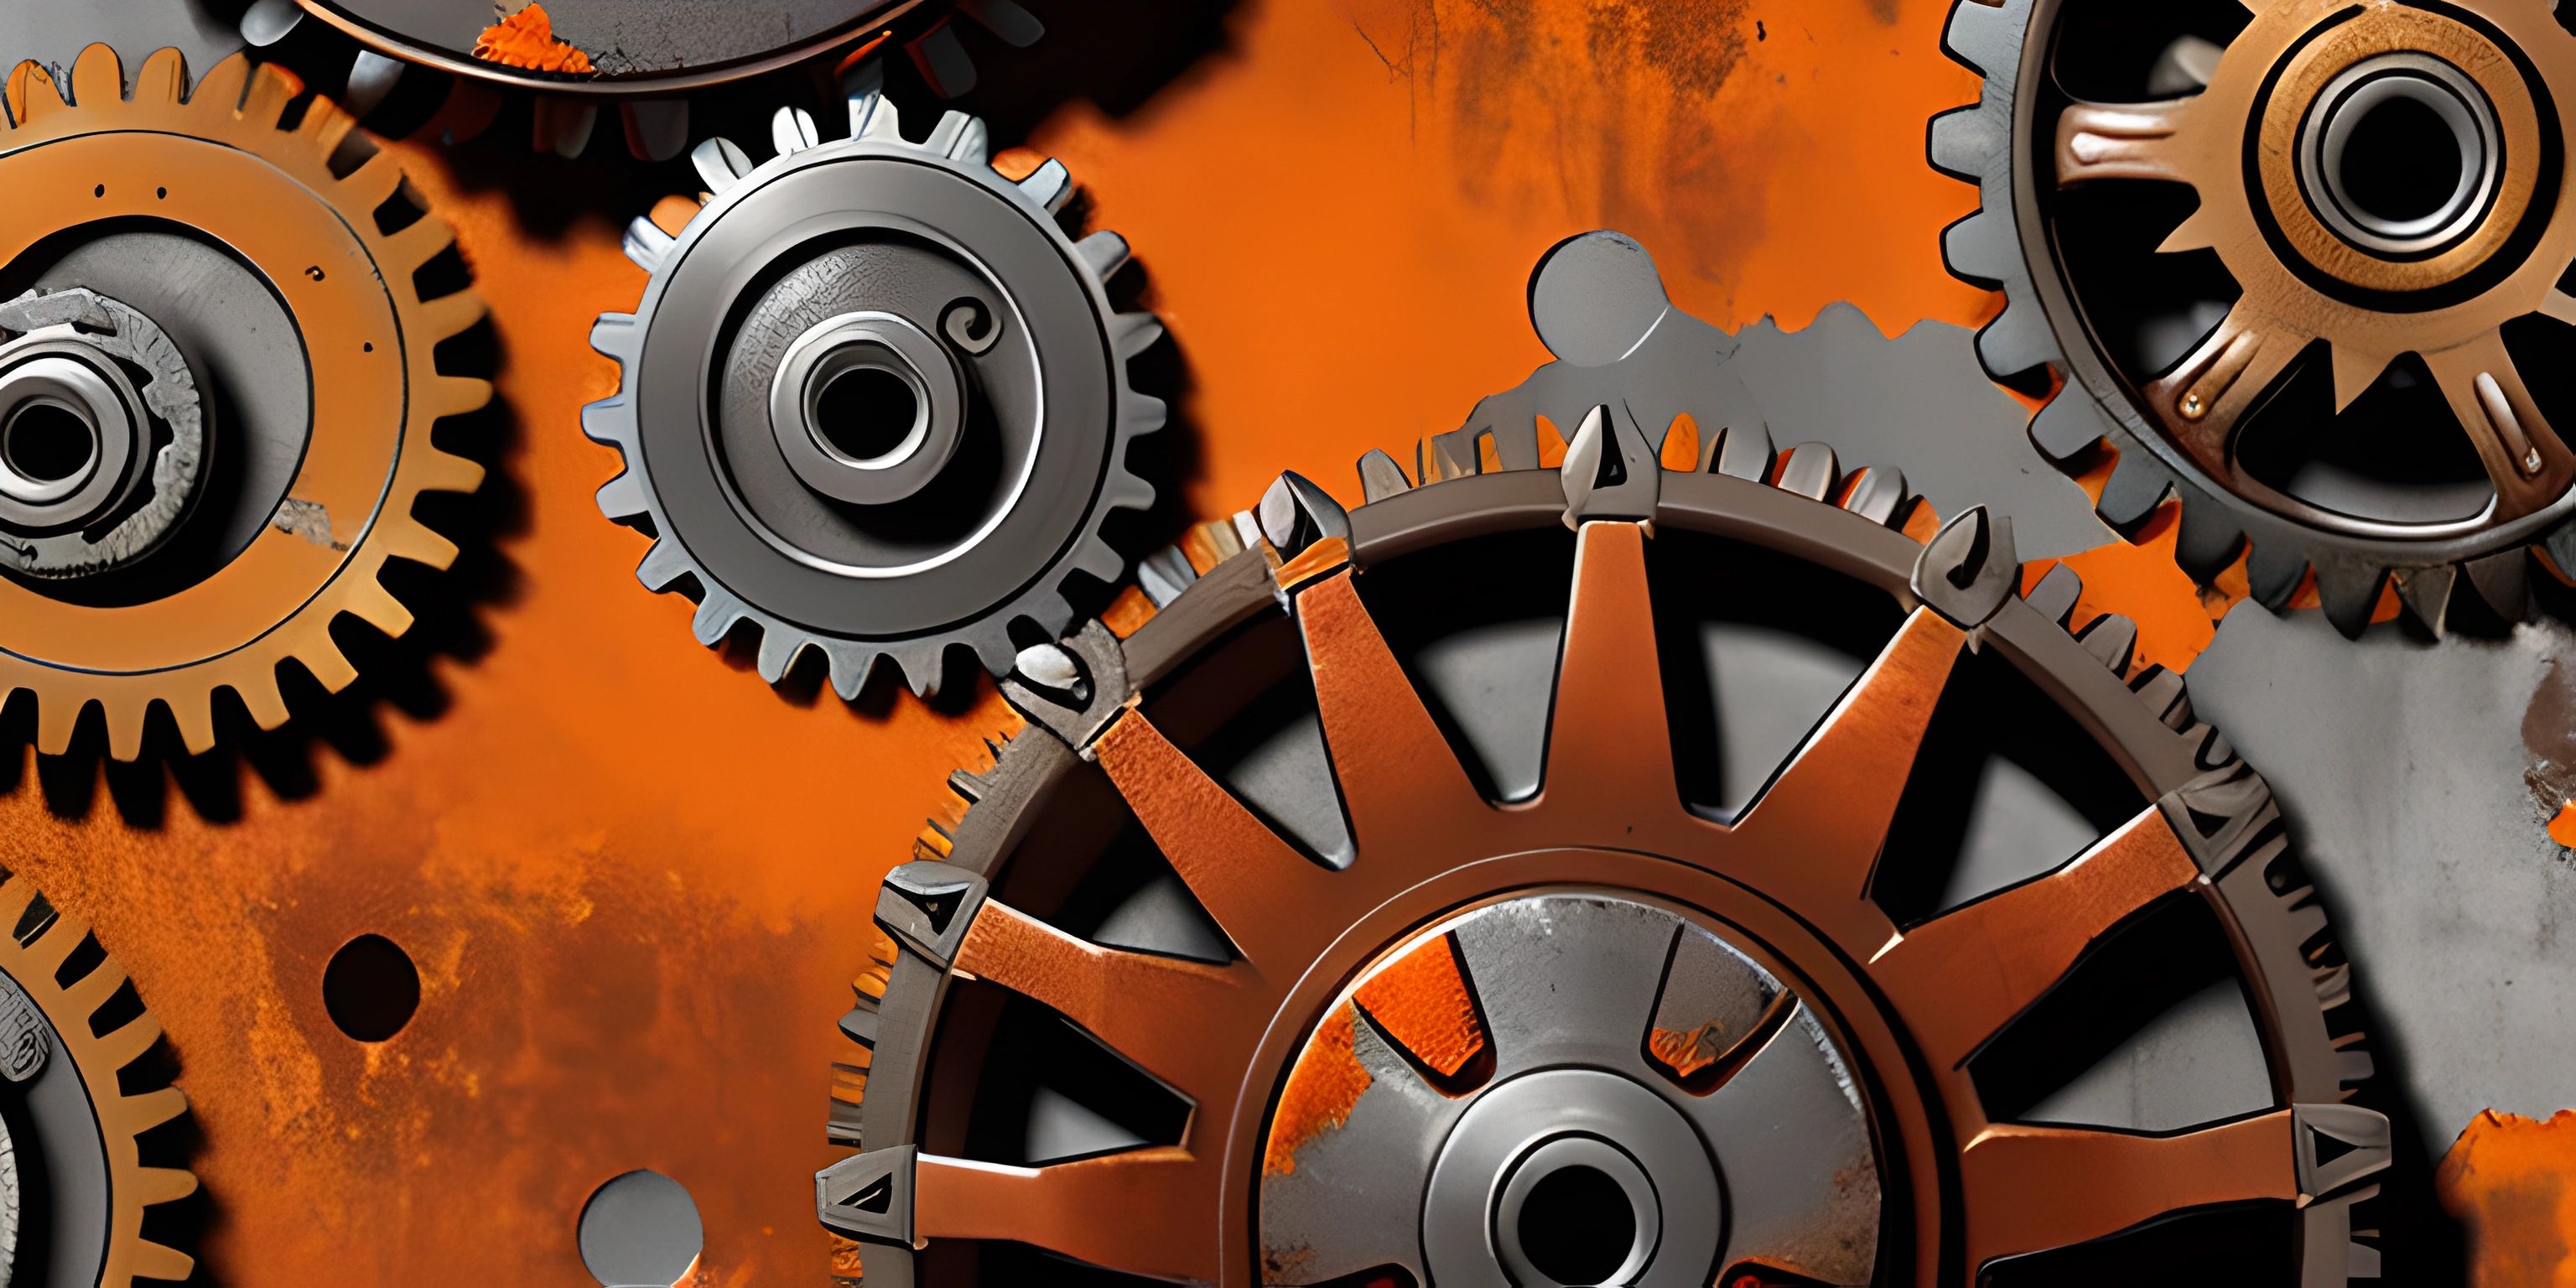 the gears are all metal together in a room with orange paint on the walls and orange floor